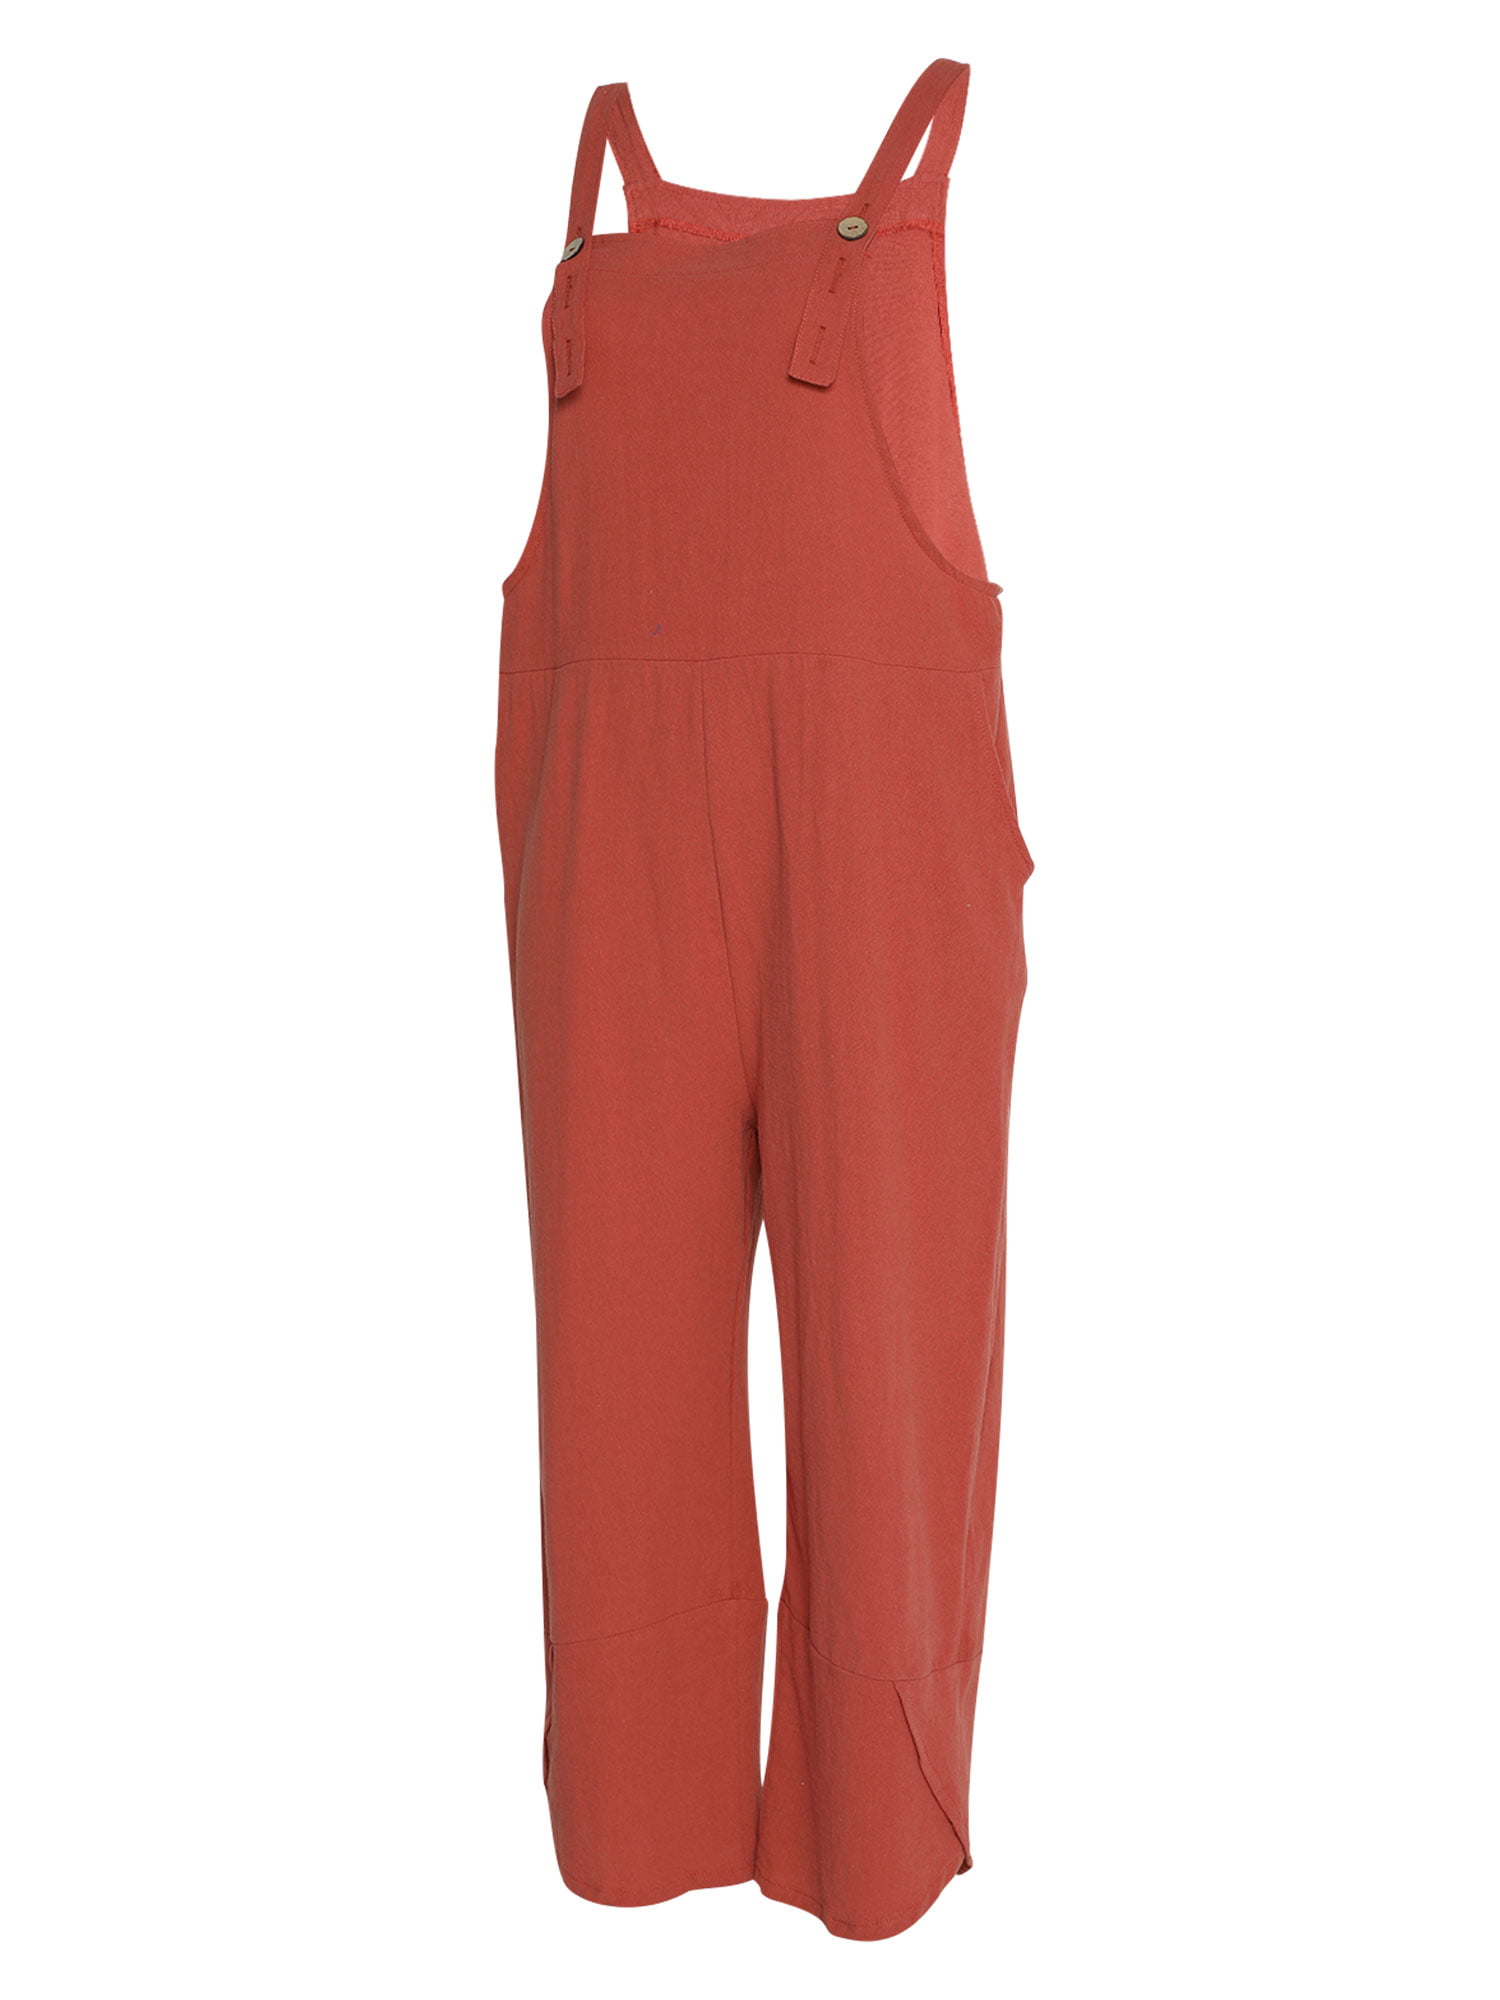 Red M discount 68% WOMEN FASHION Baby Jumpsuits & Dungarees NO STYLE Zara jumpsuit 